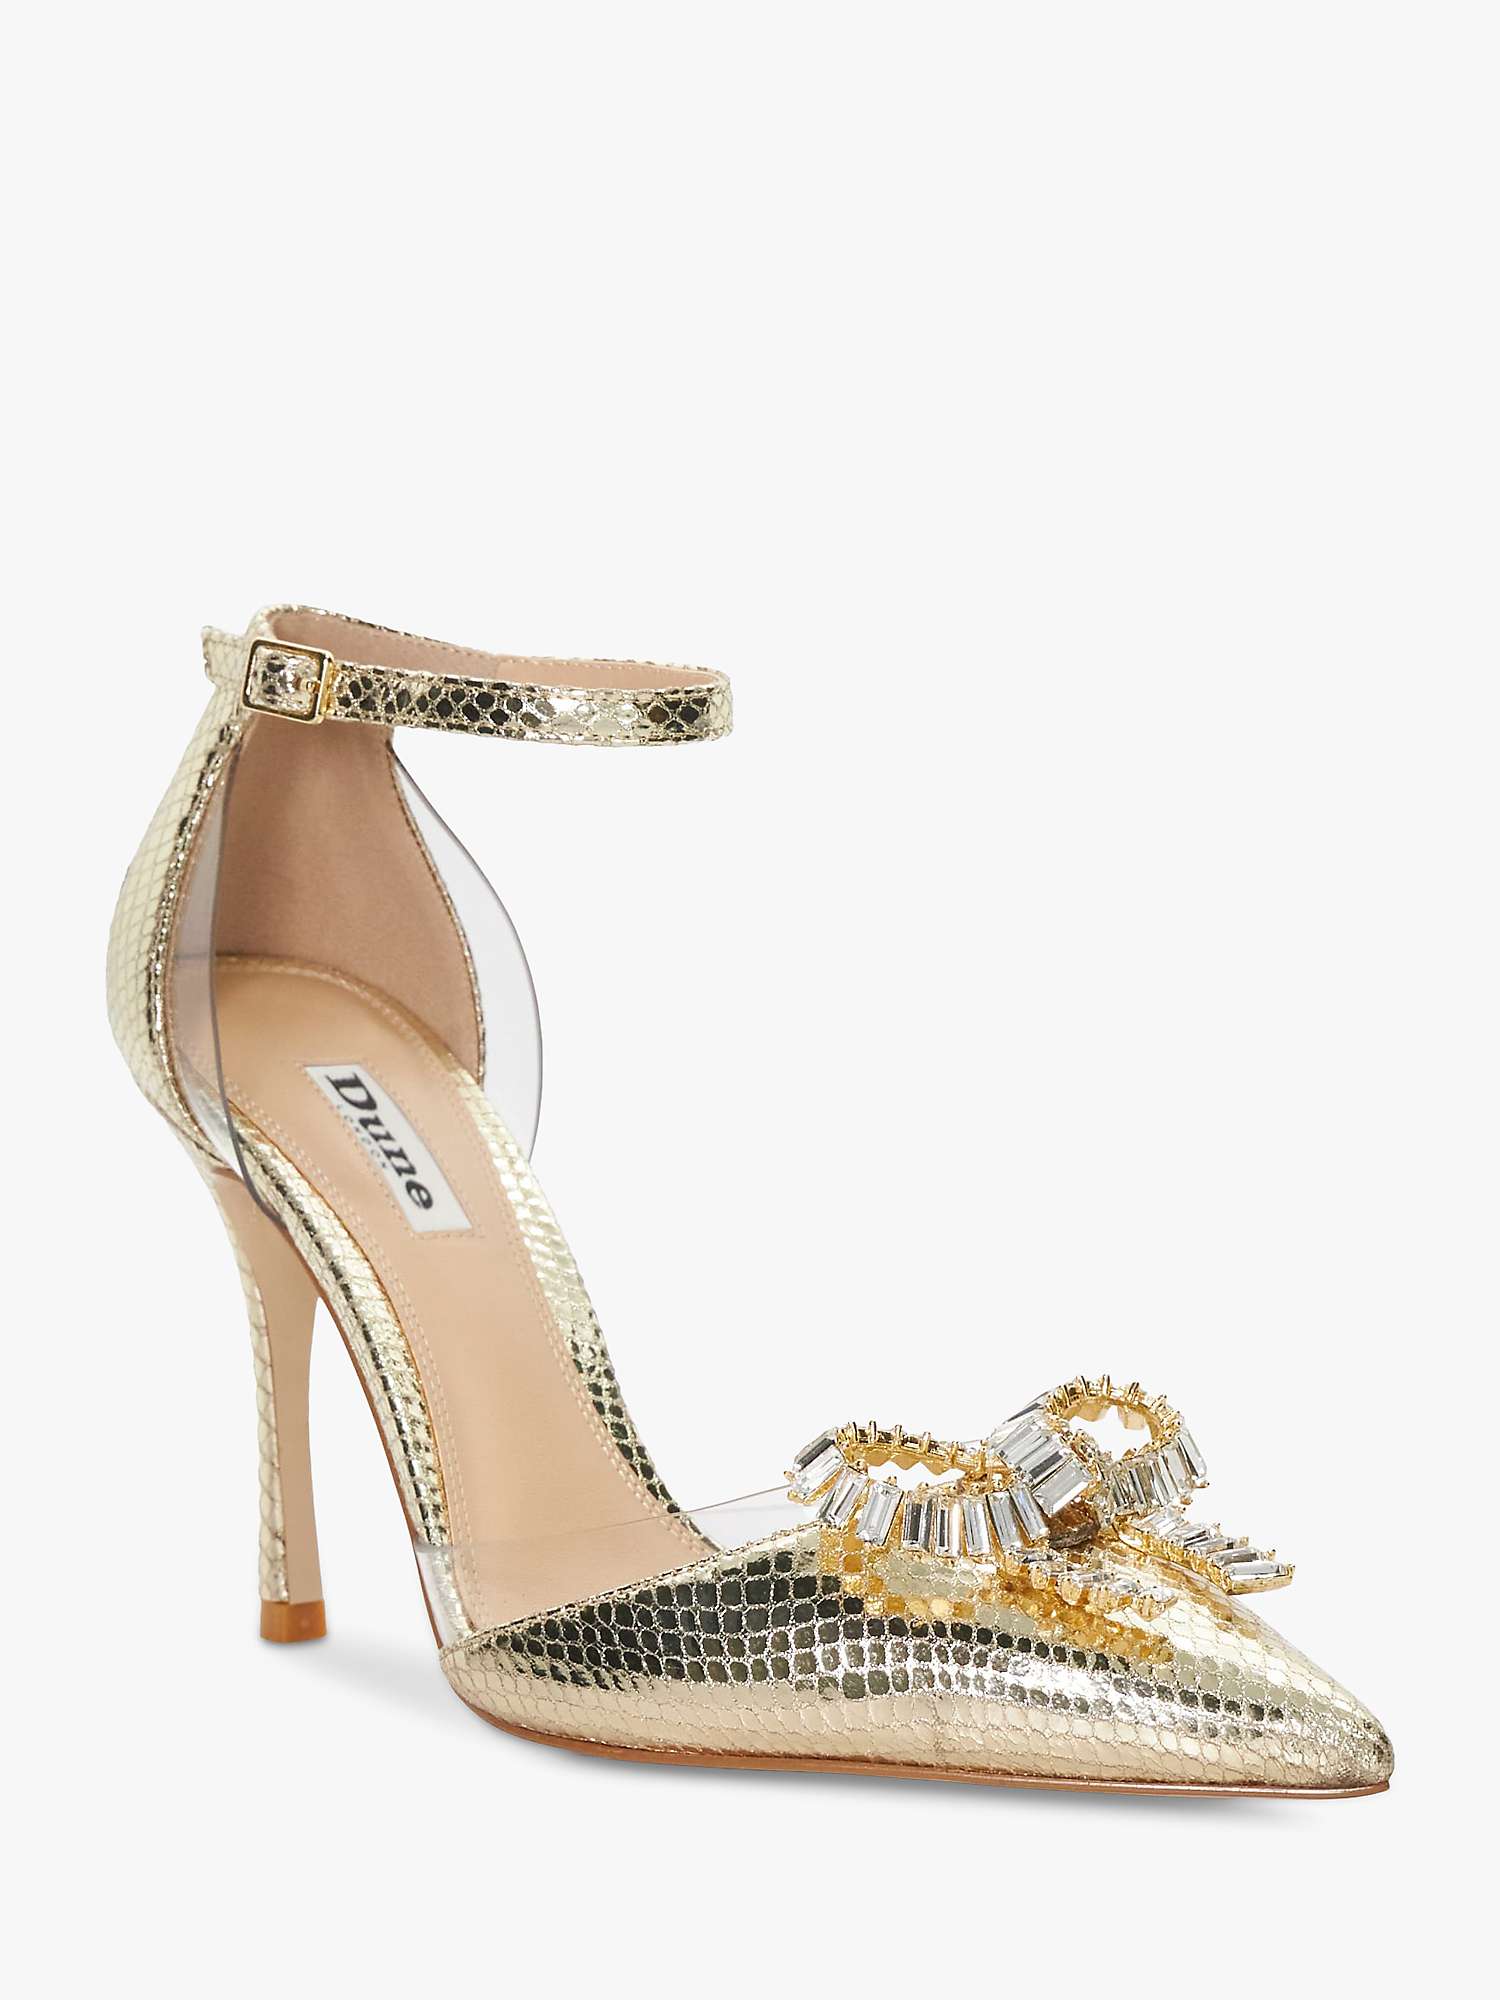 Buy Dune Confess Bow Detail Heeled Court Shoes, Gold Online at johnlewis.com